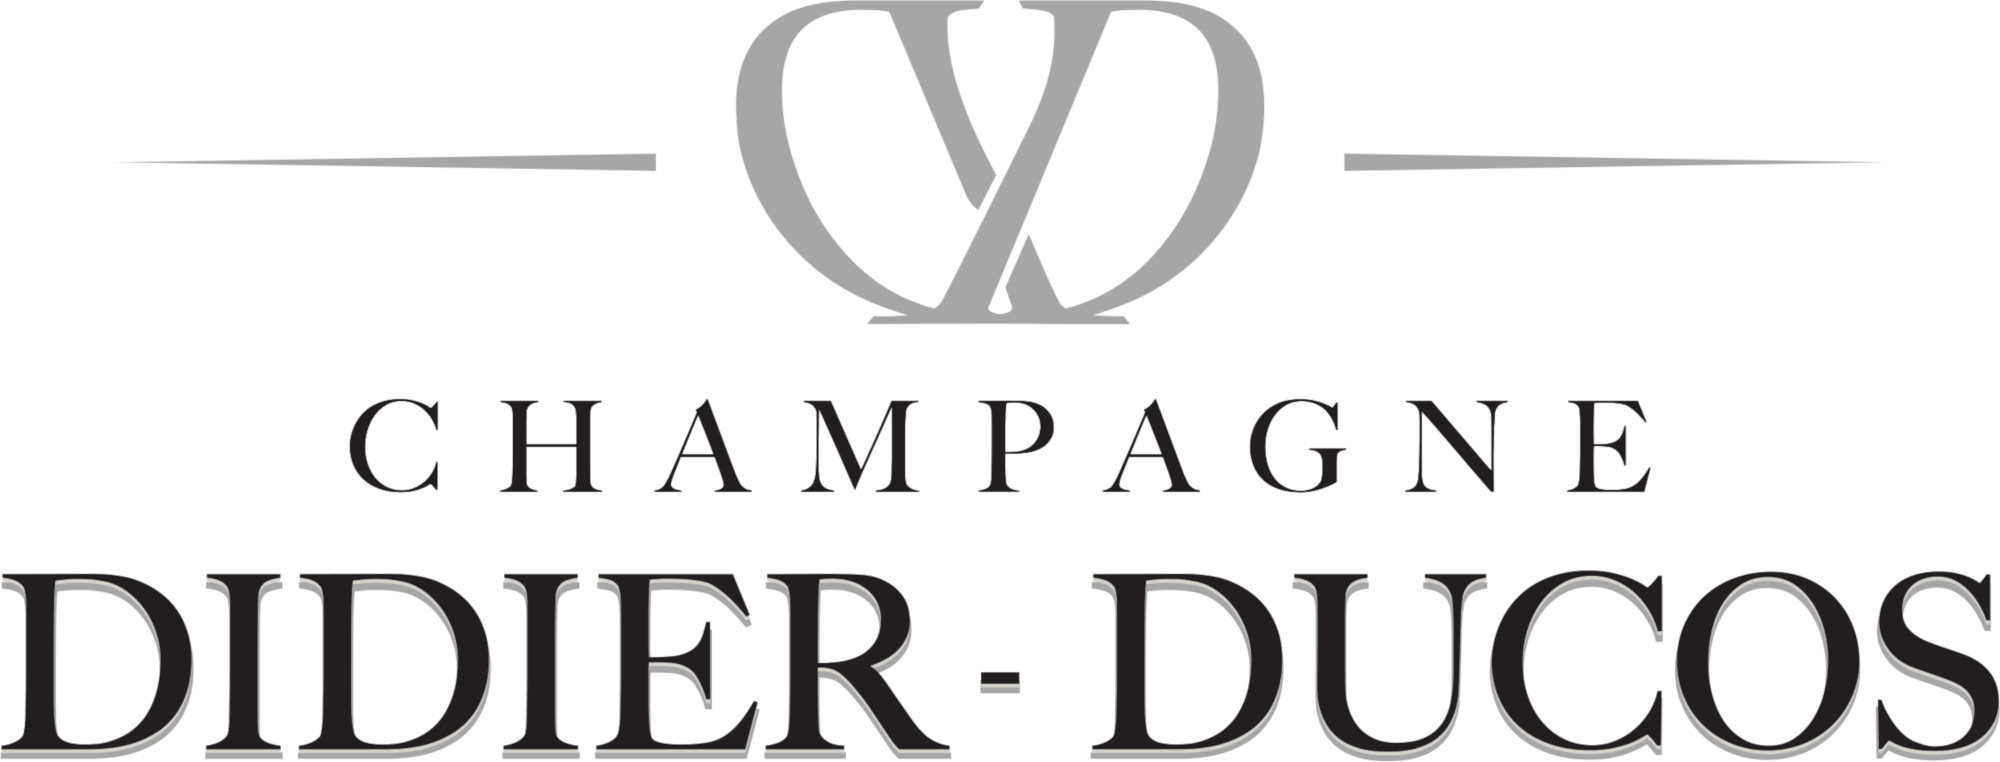 Champagne Didier-Ducos